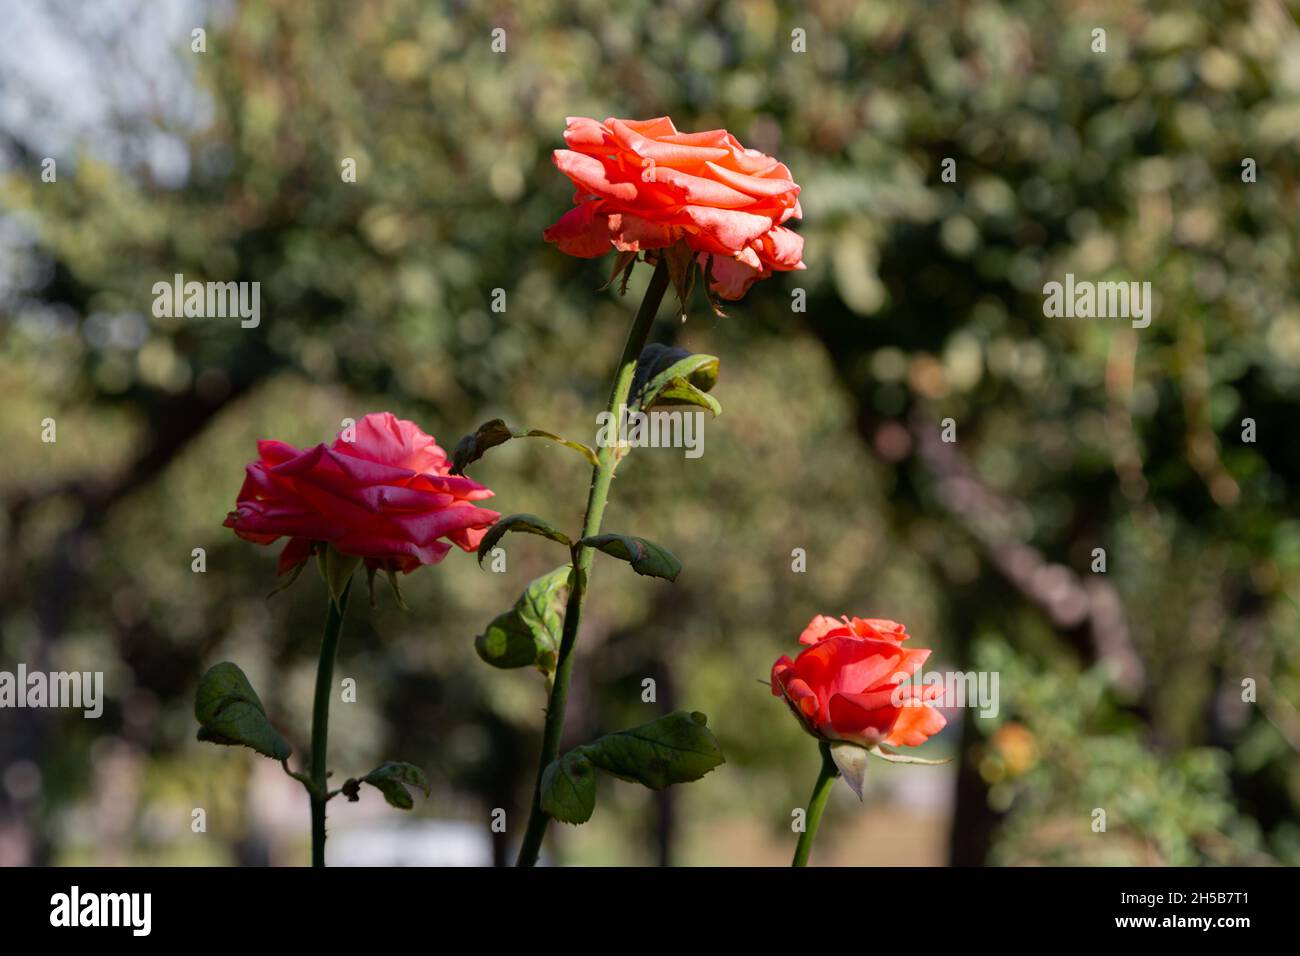 Orange rose whose branches are full of sharp thorns. The orange rose represents desire, enthusiasm and pride. Stock Photo